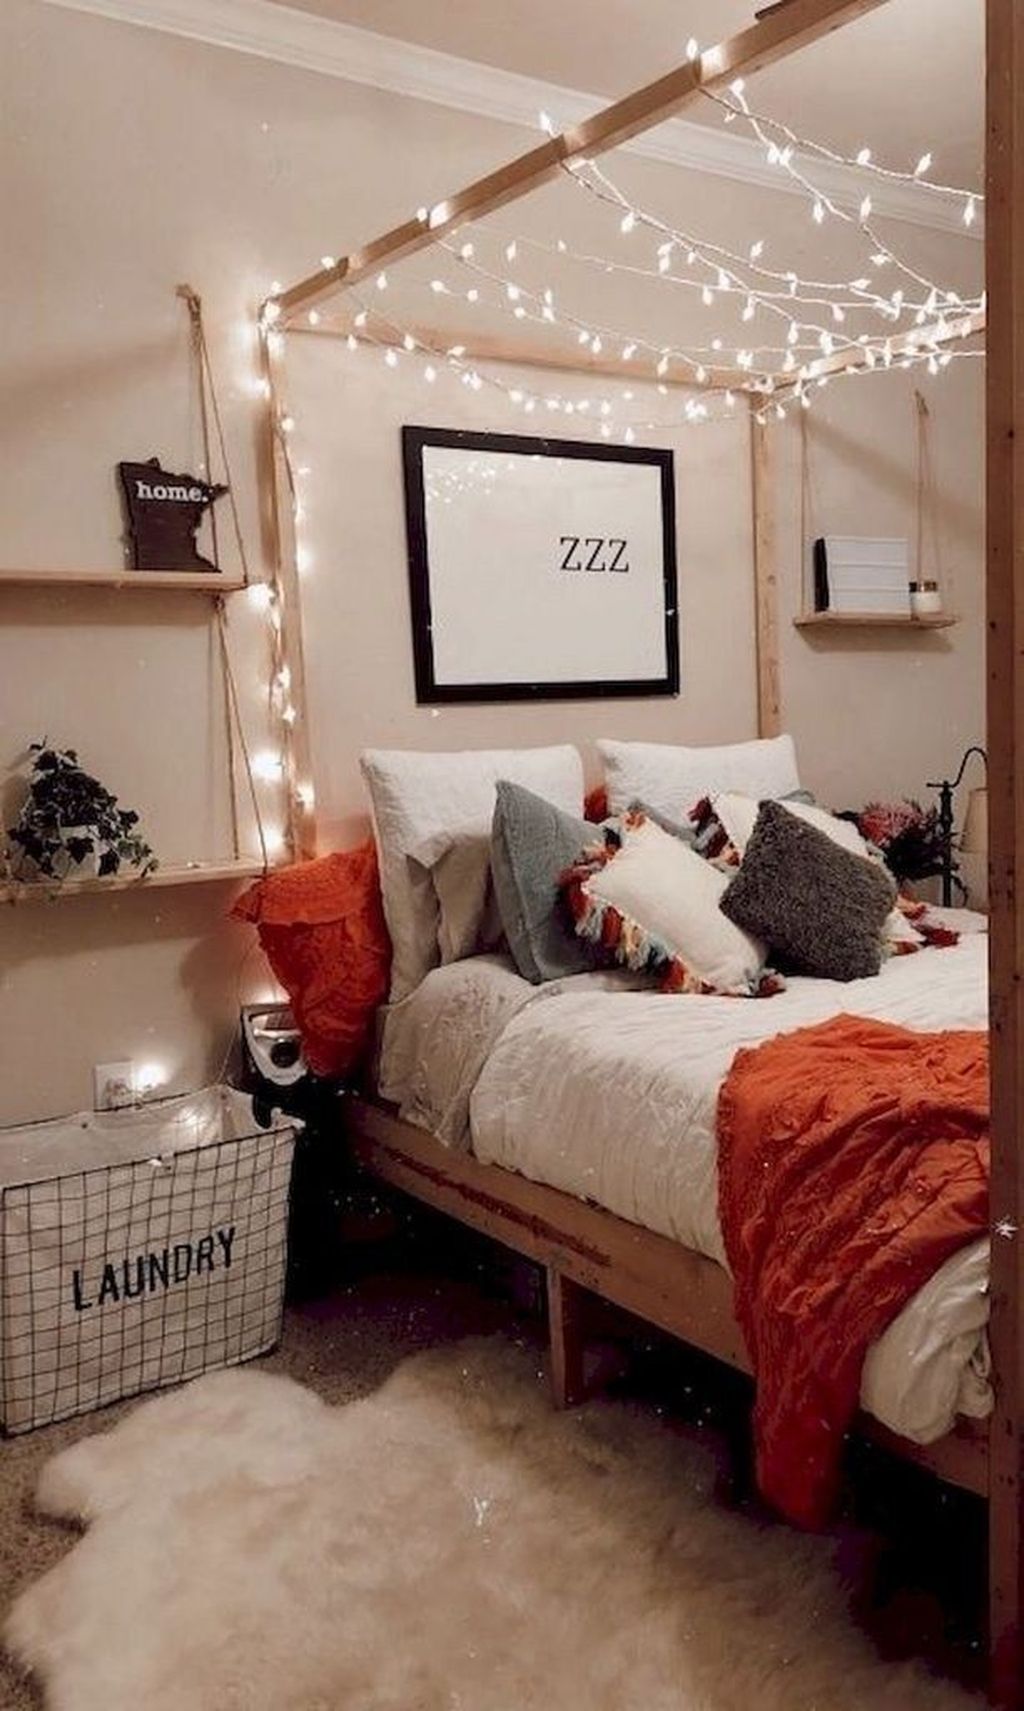 The Best Diy Bedroom Decor Ideas You Have To Try 29 Pimphomee